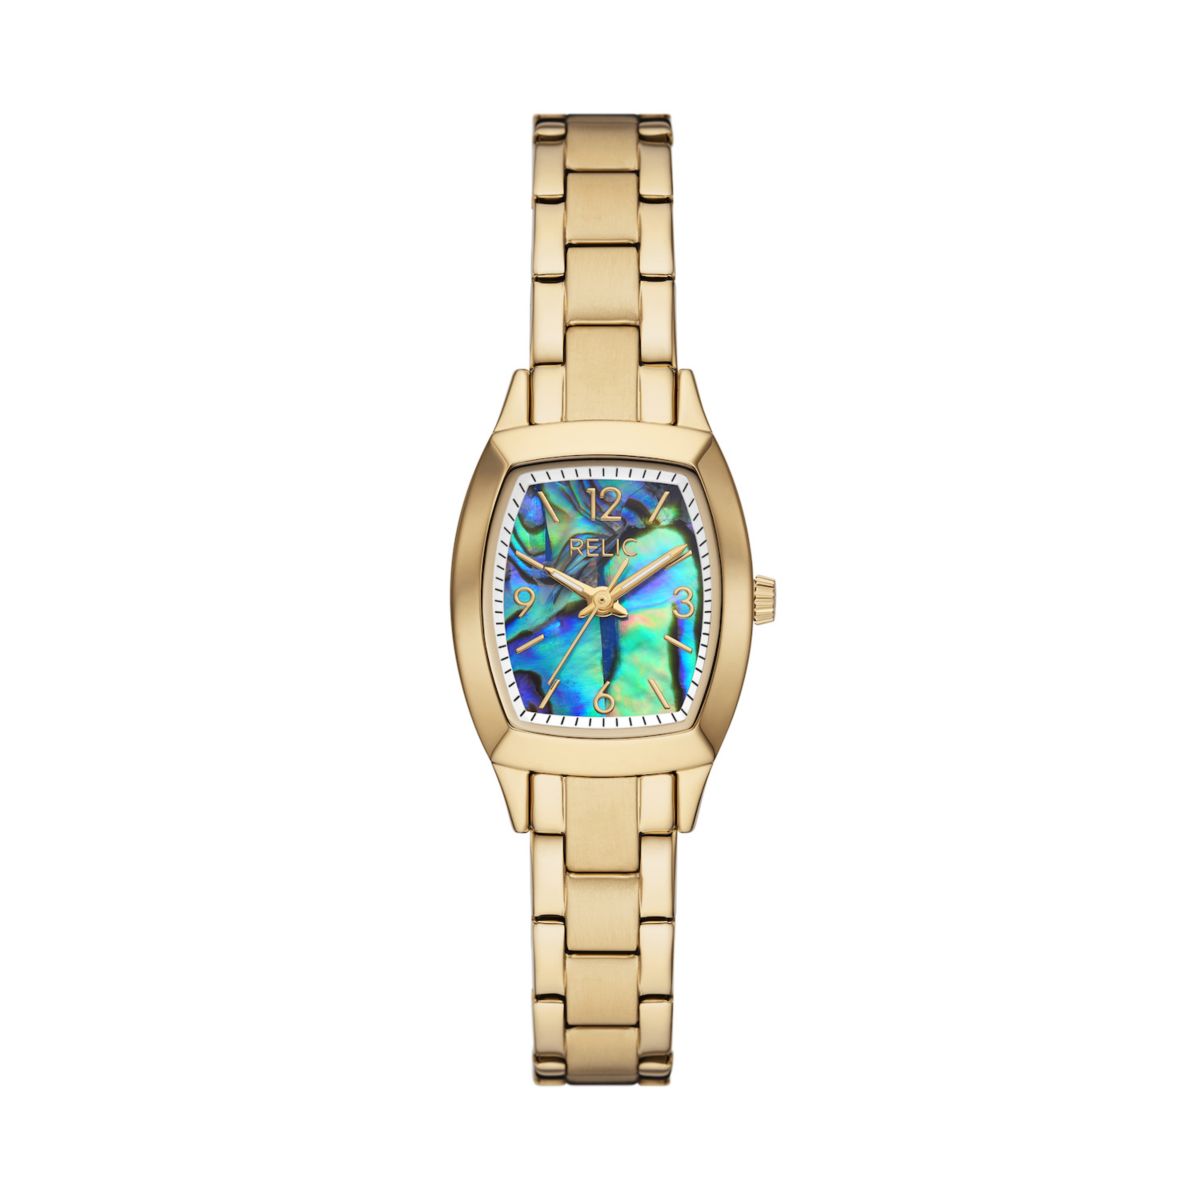 Женские часы Relic от Fossil Everly Gold и Abalone Watch Relic